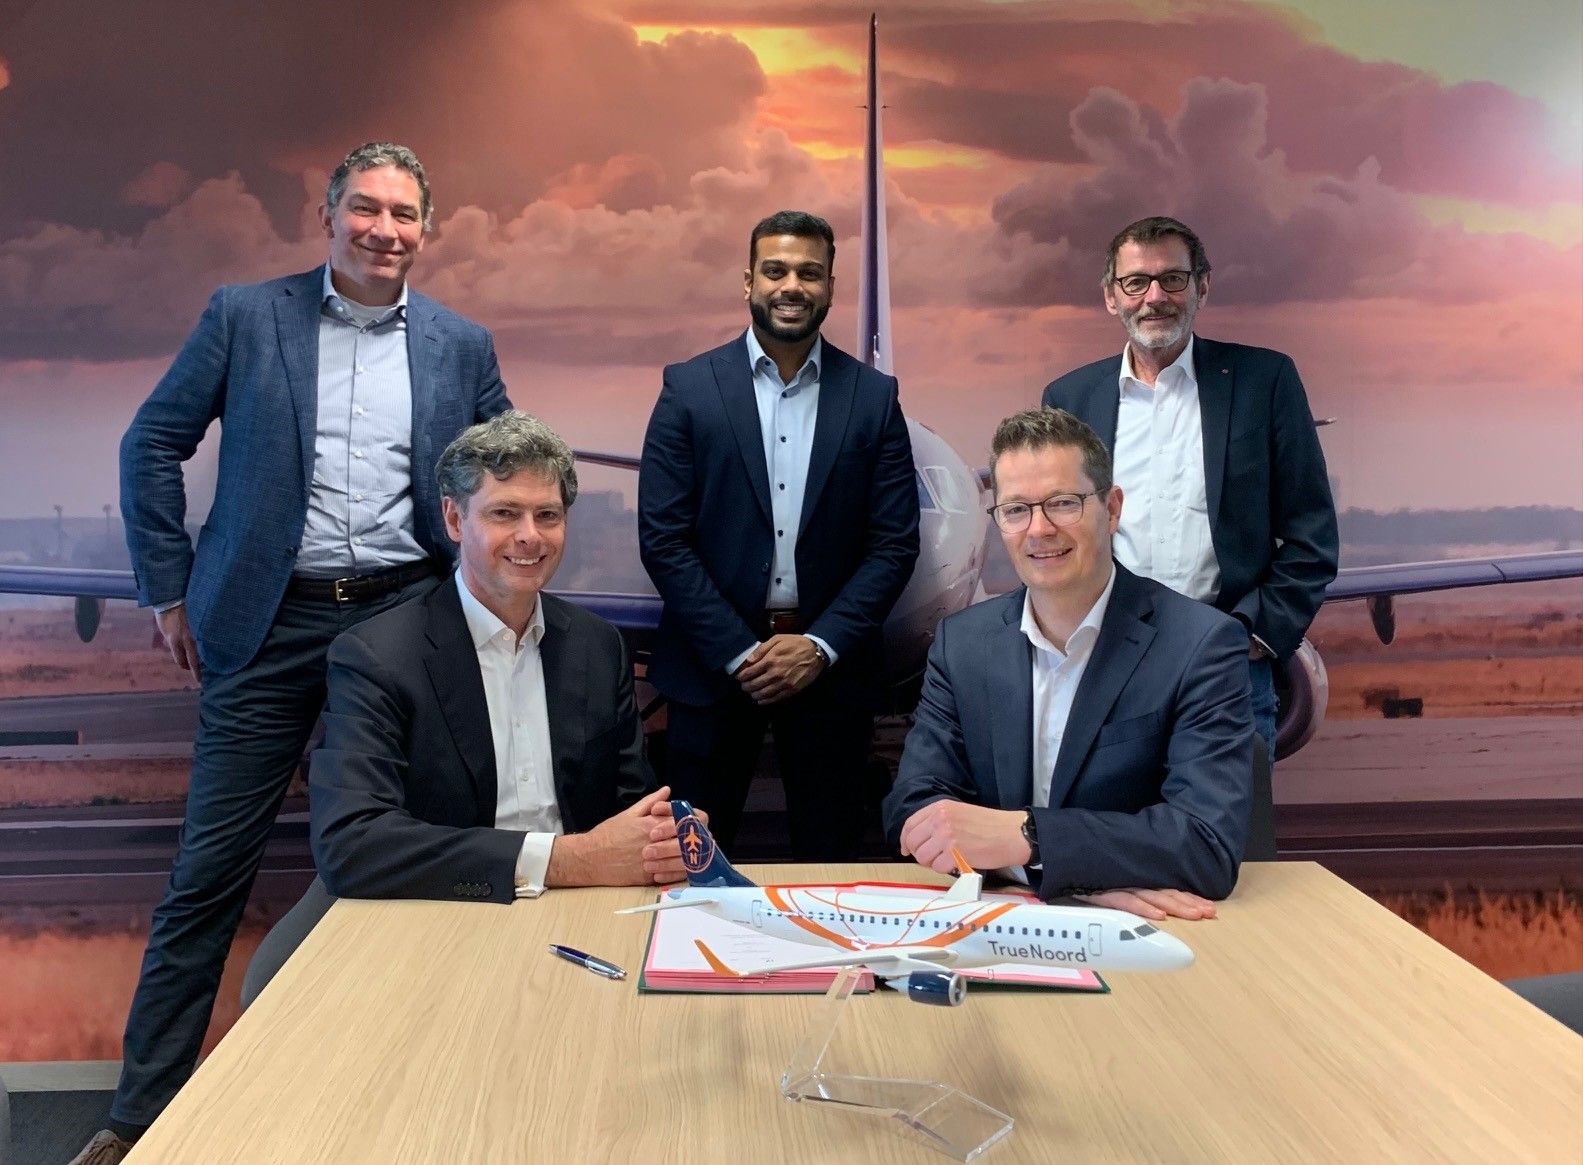 Standing : Richard Jacobs , Chief Commercial Officer, TrueNoord, Ahmed Akhtar Ali , Sales Manager – Europe, TrueNoord, und Bruno Jans , Project Leader. - Sitting : Anne - Bart Tieleman , Chief Executive Officer, TrueNoord, und Tobias Pogorevc , Chief Executive Officer of Helvetic Airways